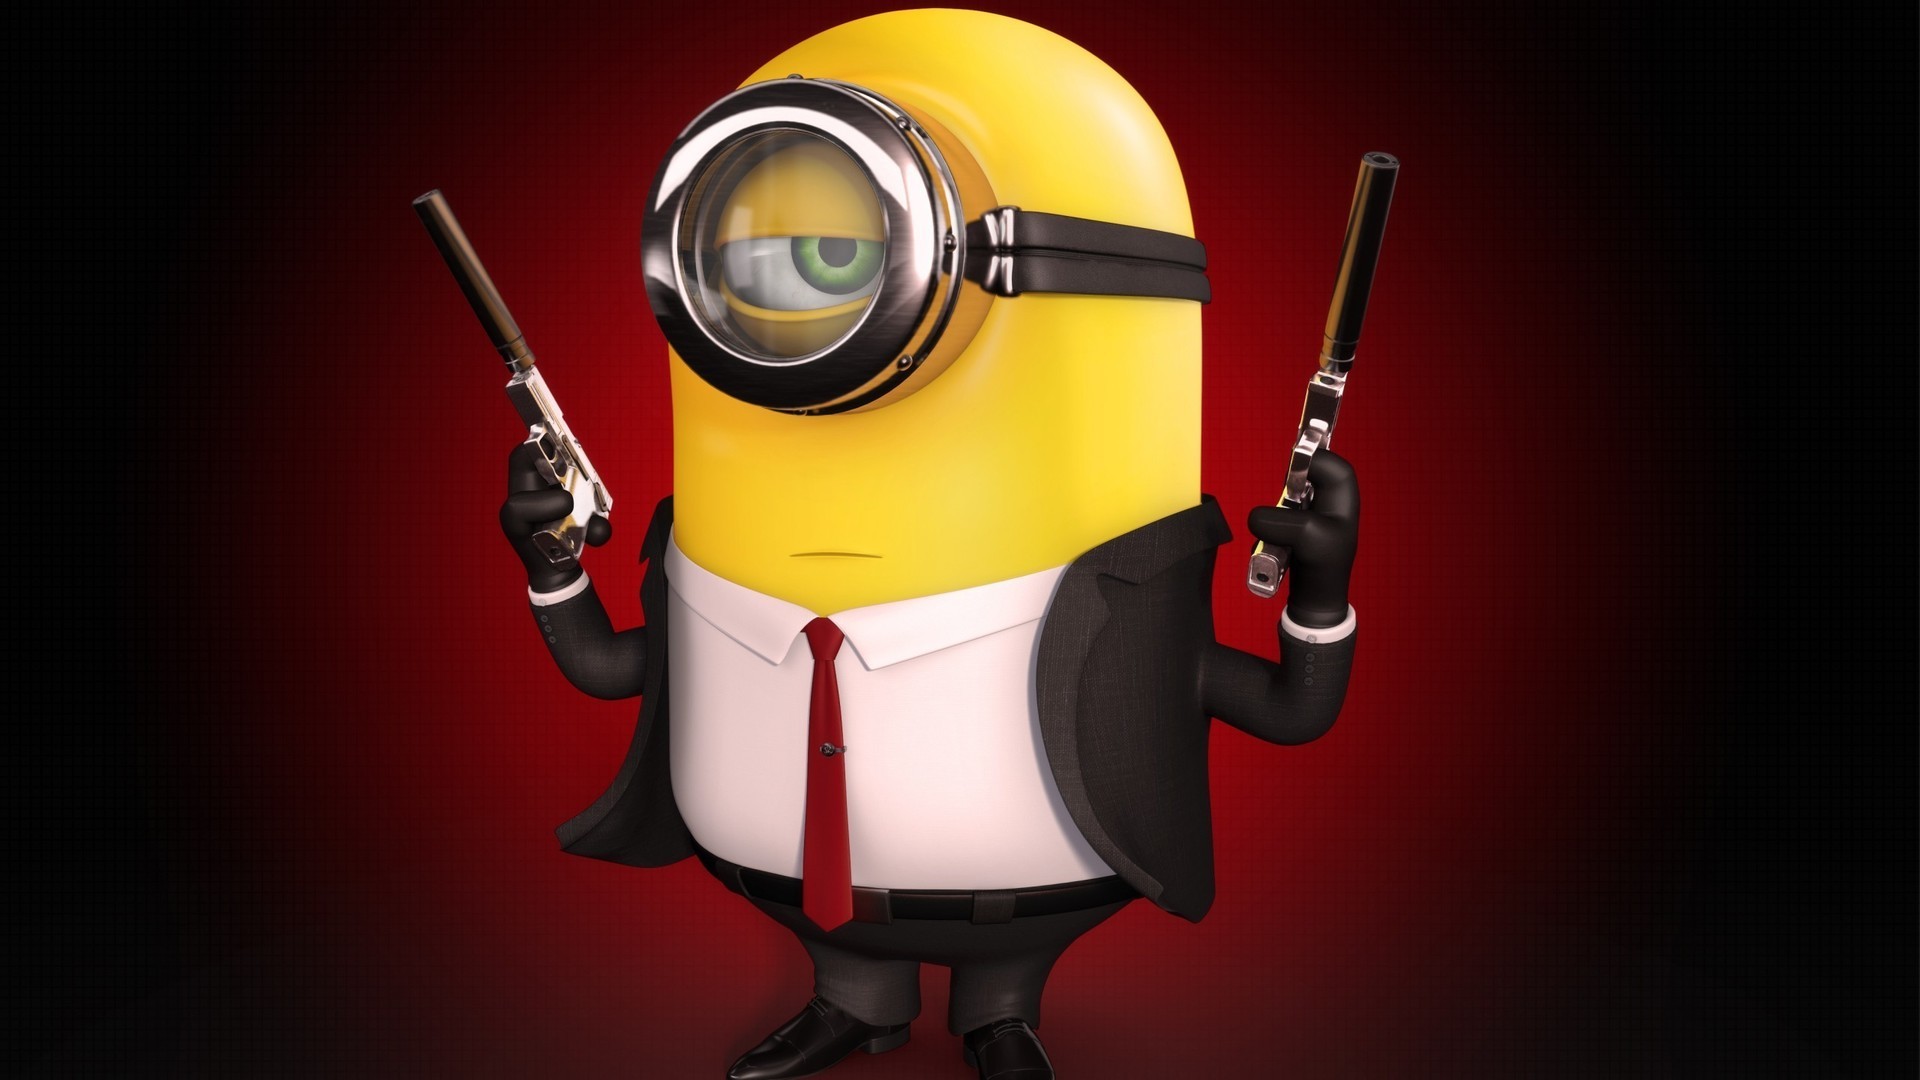 1920x1080 Minions high resolution wallpapers